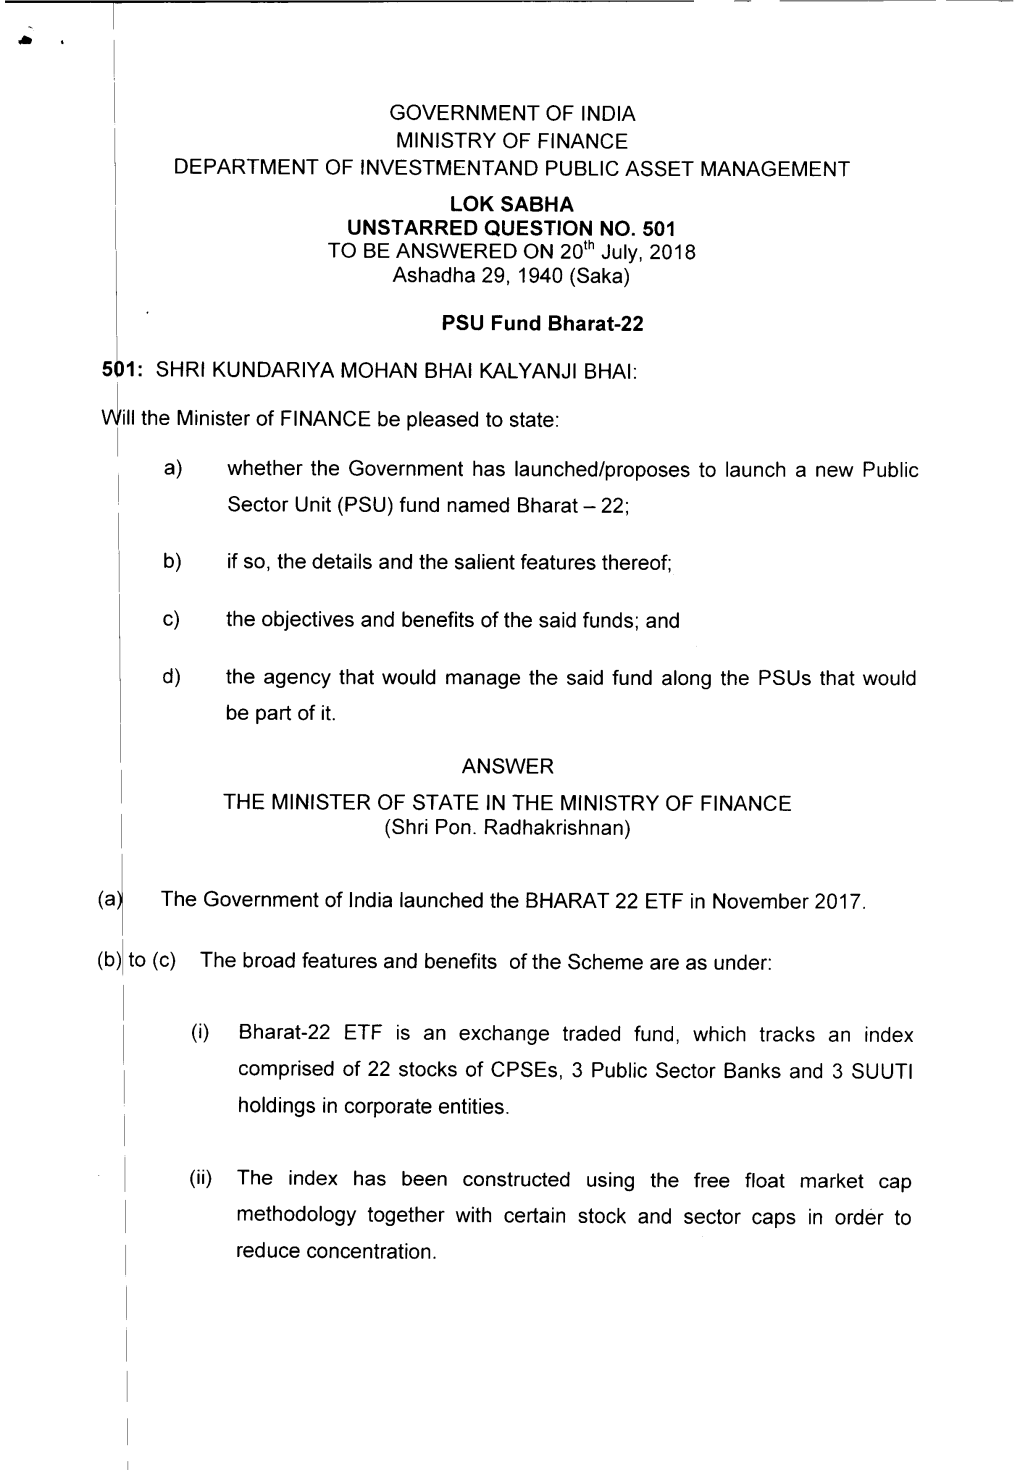 Government of India Ministry of Finance Department of Investmentand Public Asset Management Lok Sabha Unstarred Question No